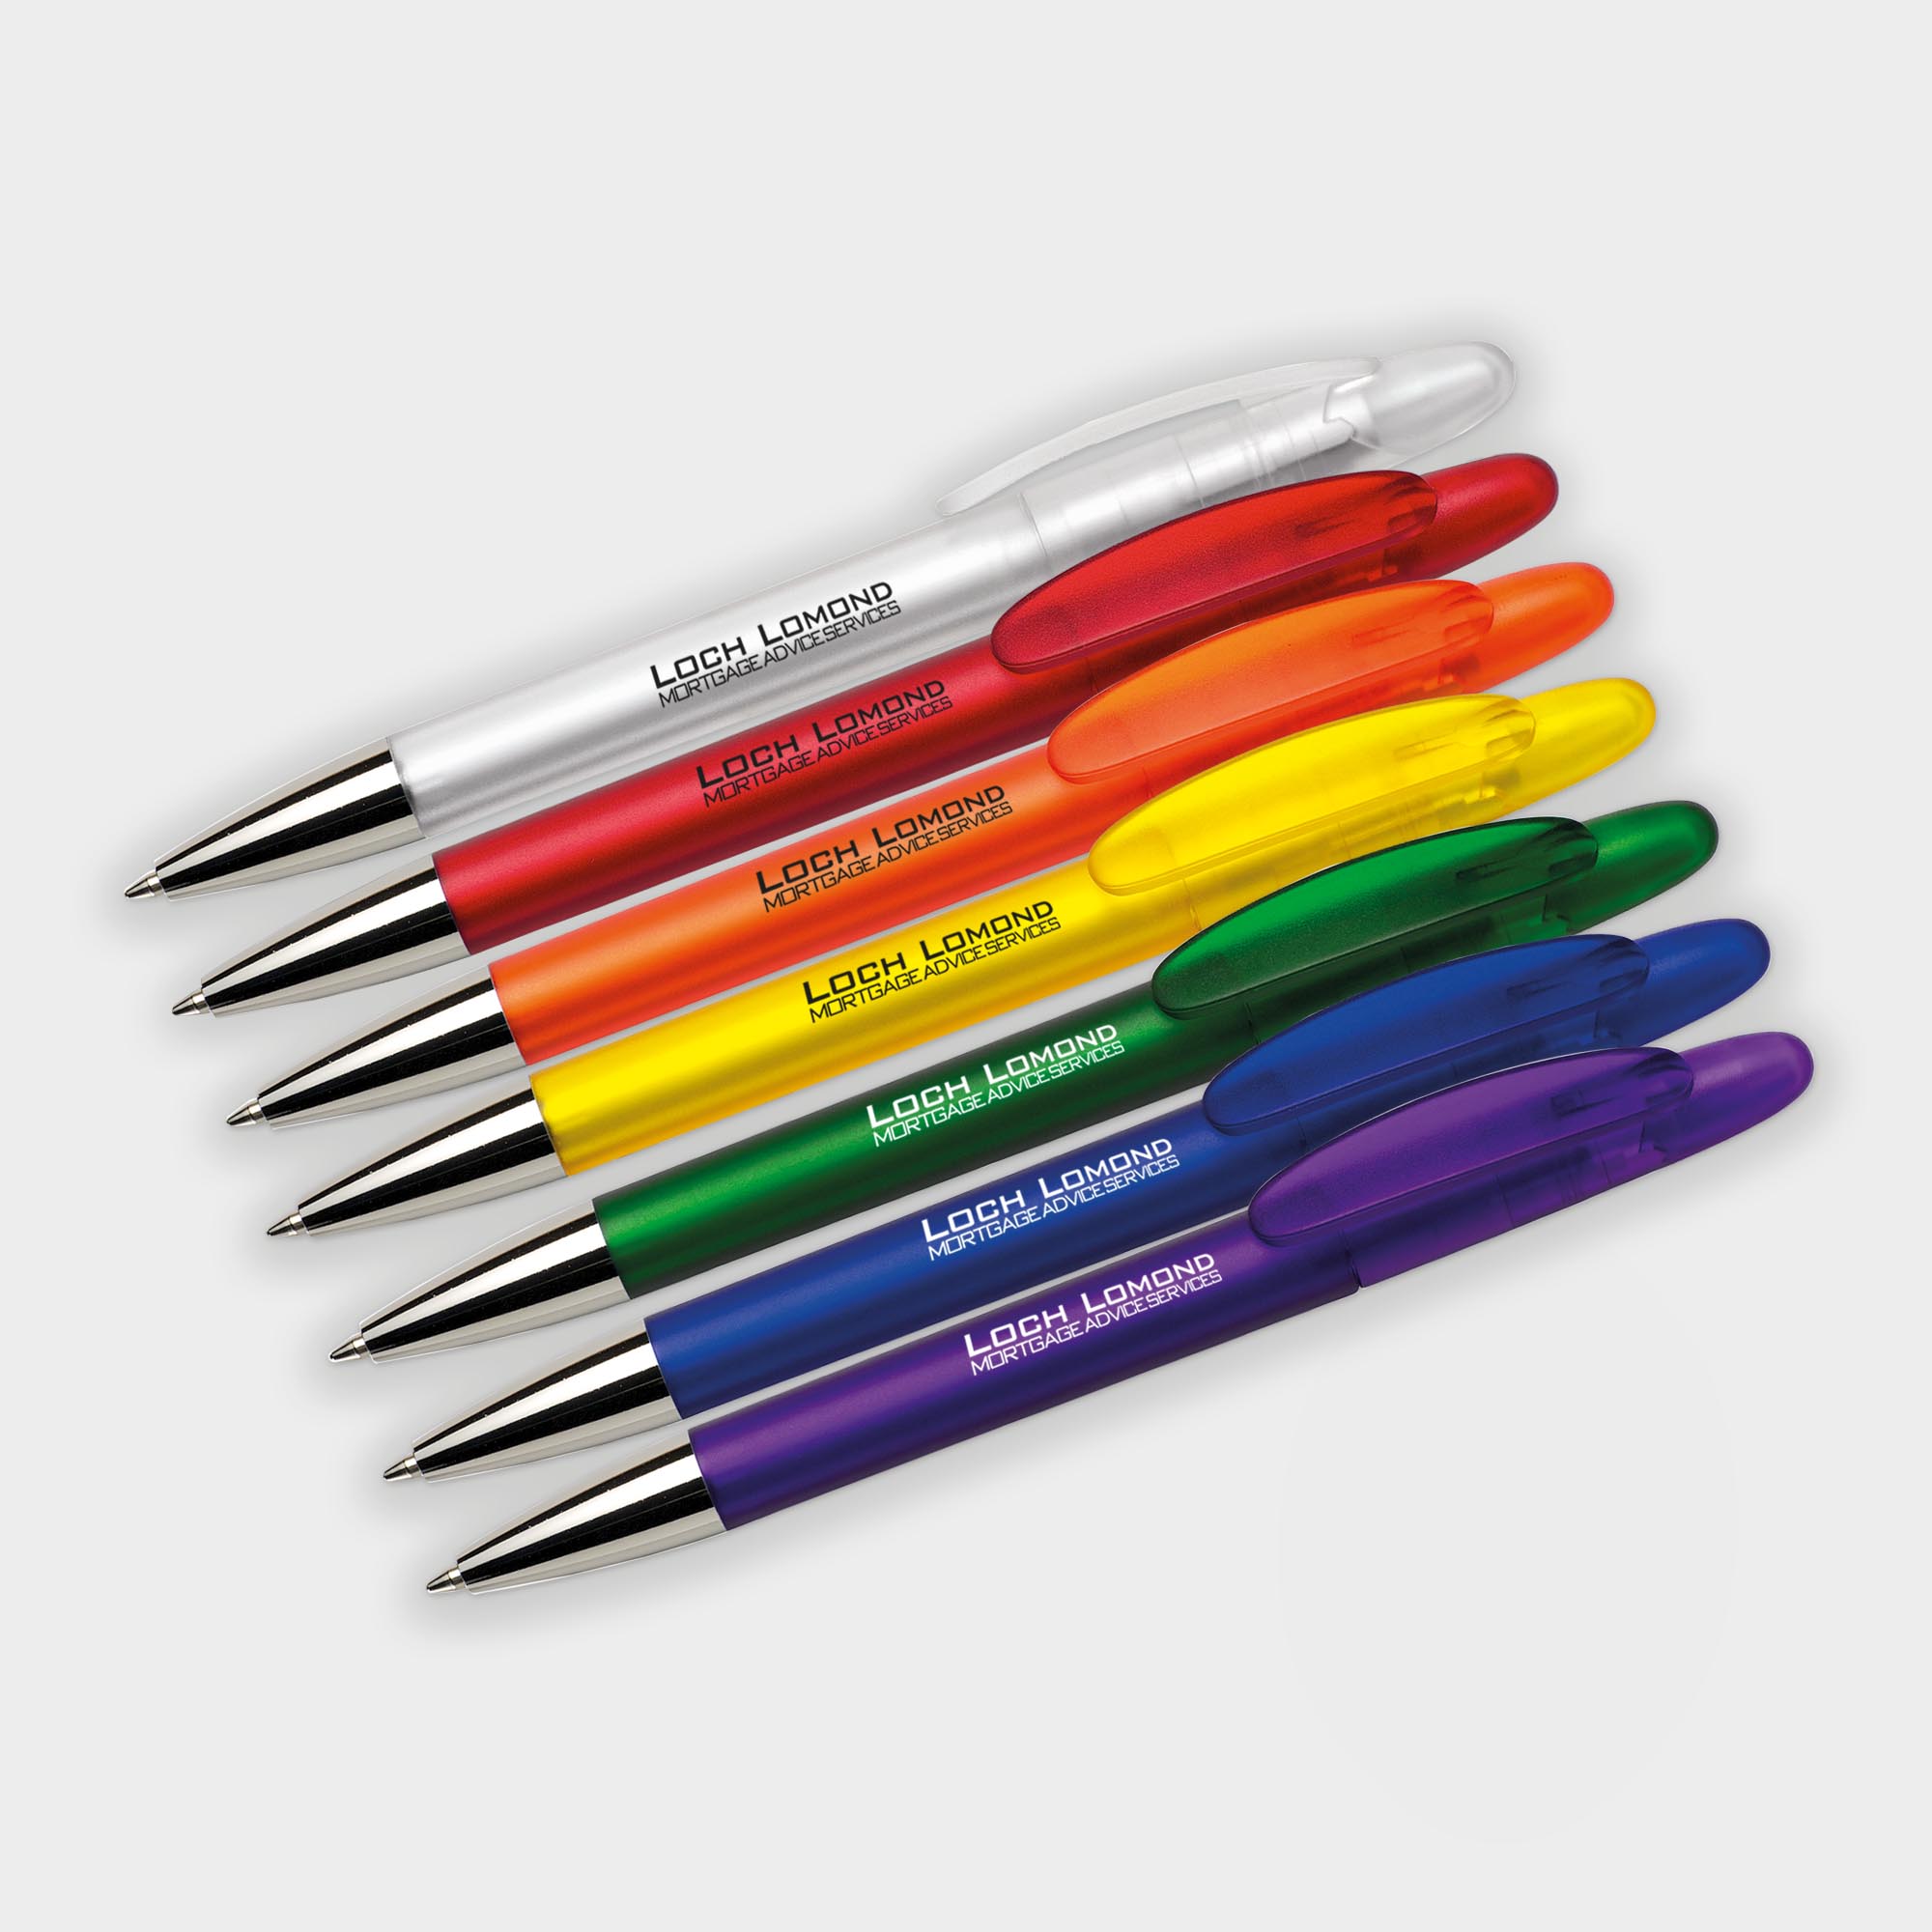 The Green & Good Hudson Pen made from biodegradable plastic. Stylish executive pen with twist action, available in a variety of popular colours with chrome tip. Nice haptic feel and large print area. Black ink as standard.